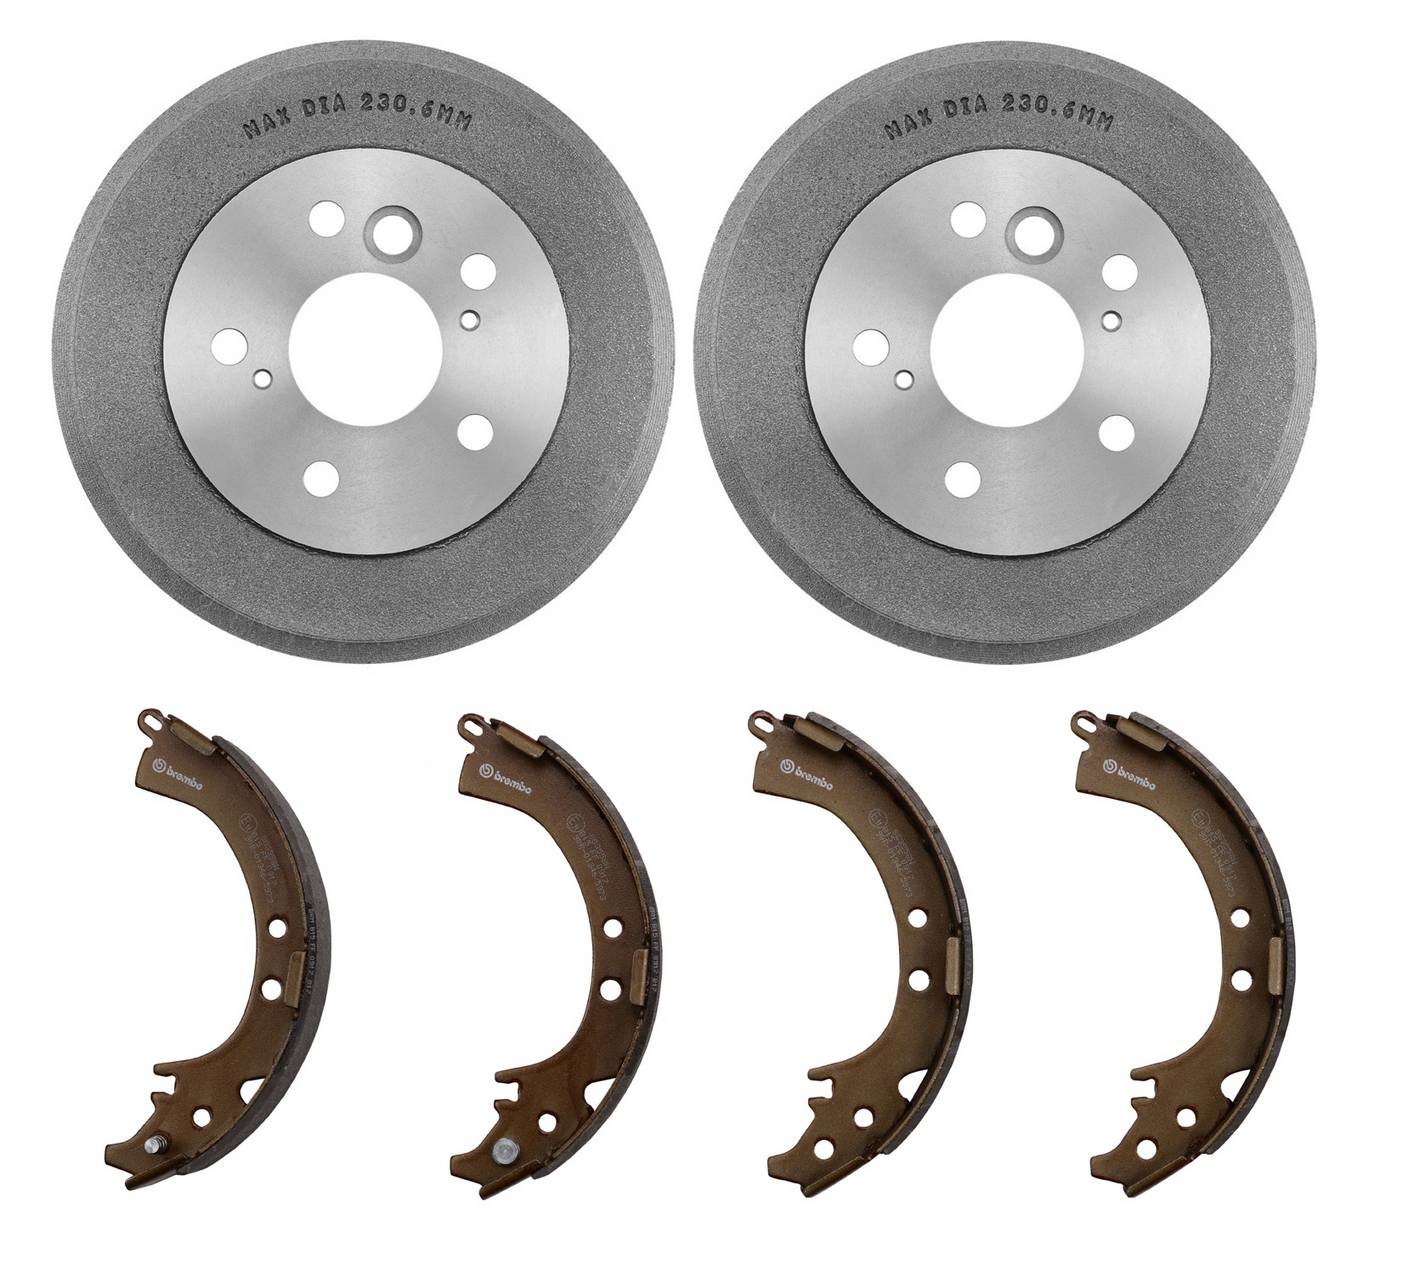 Toyota Drum Brake Shoe and Drum Kit - Rear (226.2mm) Brembo